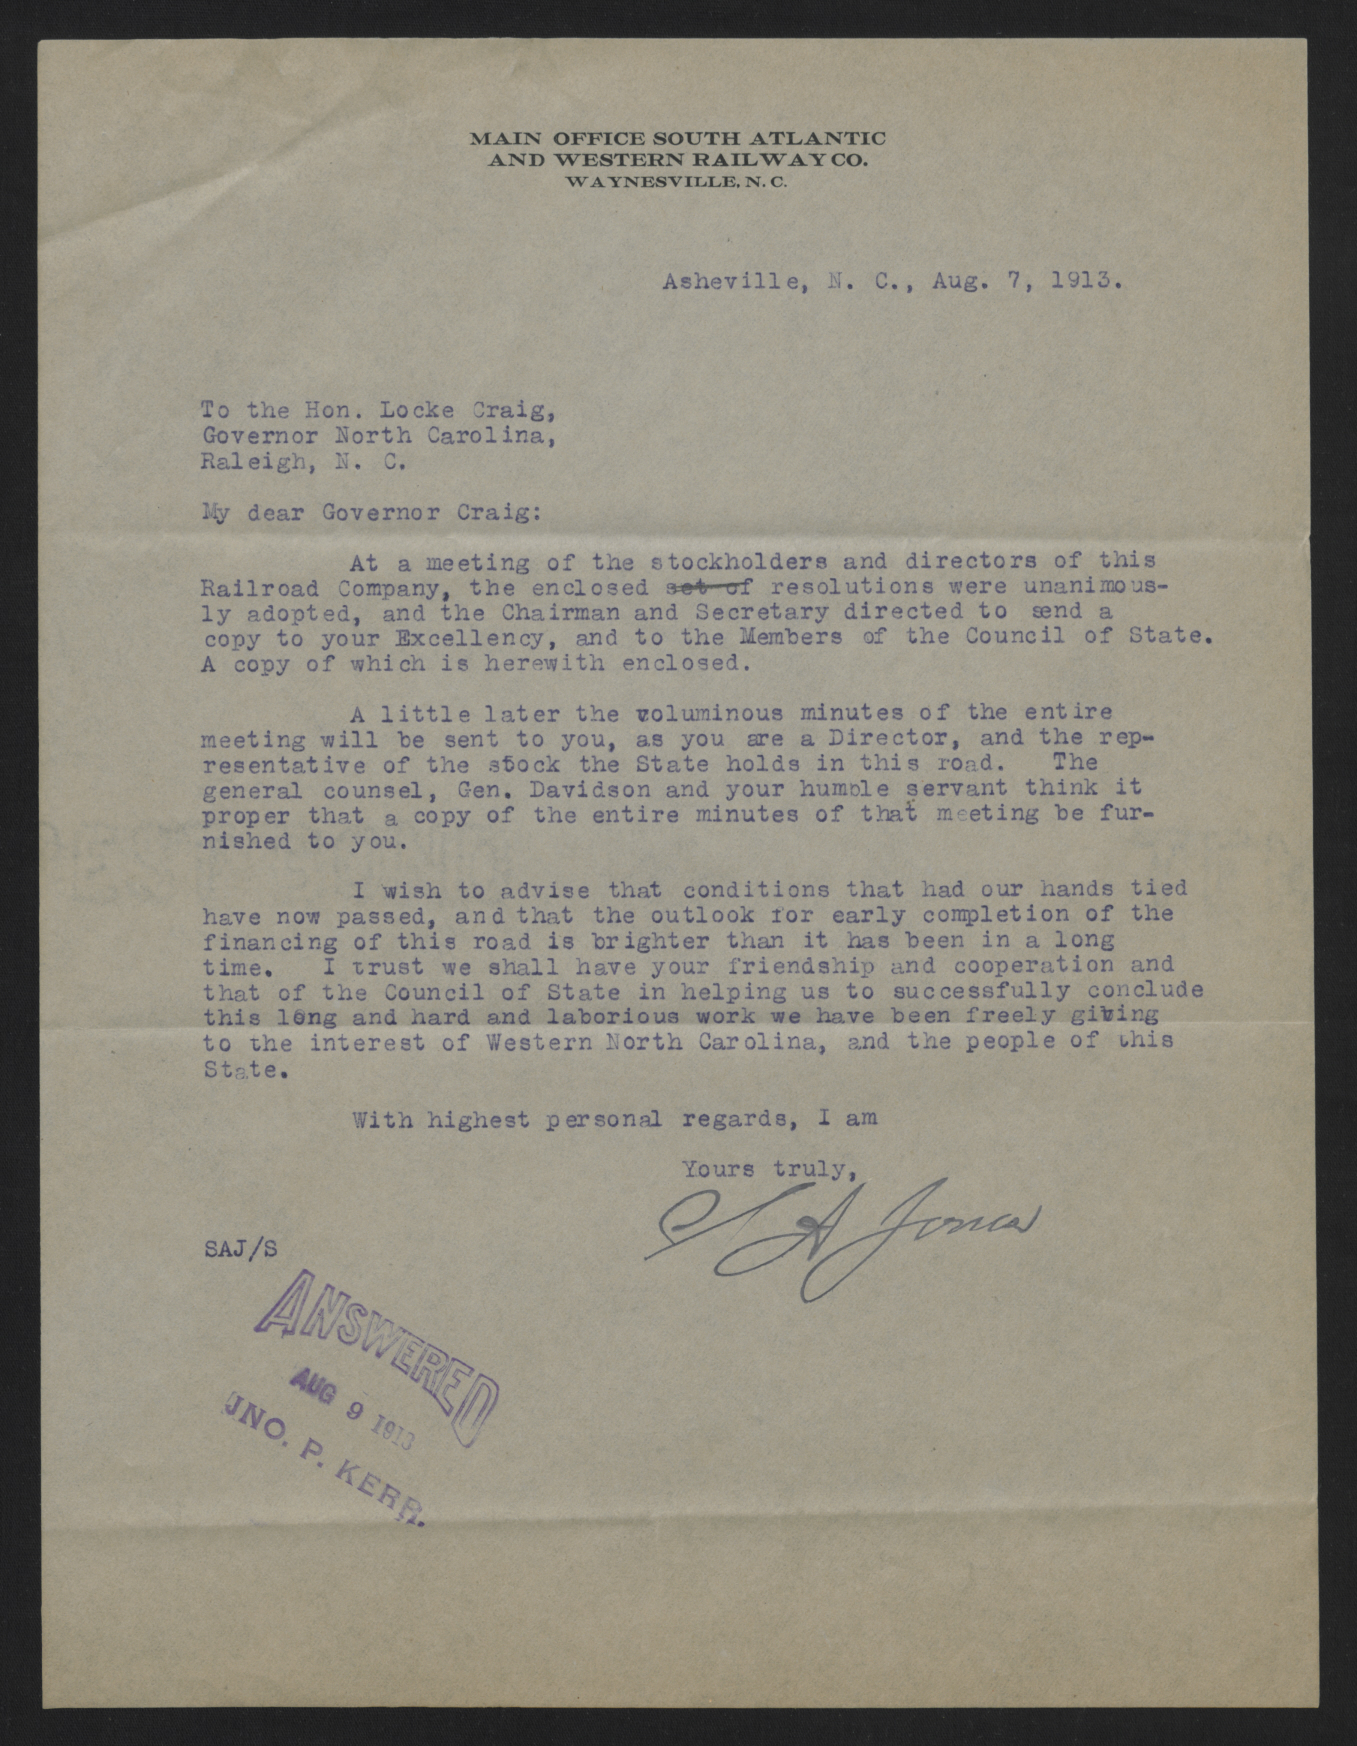 Letter from Jones to Craig, August 7, 1913